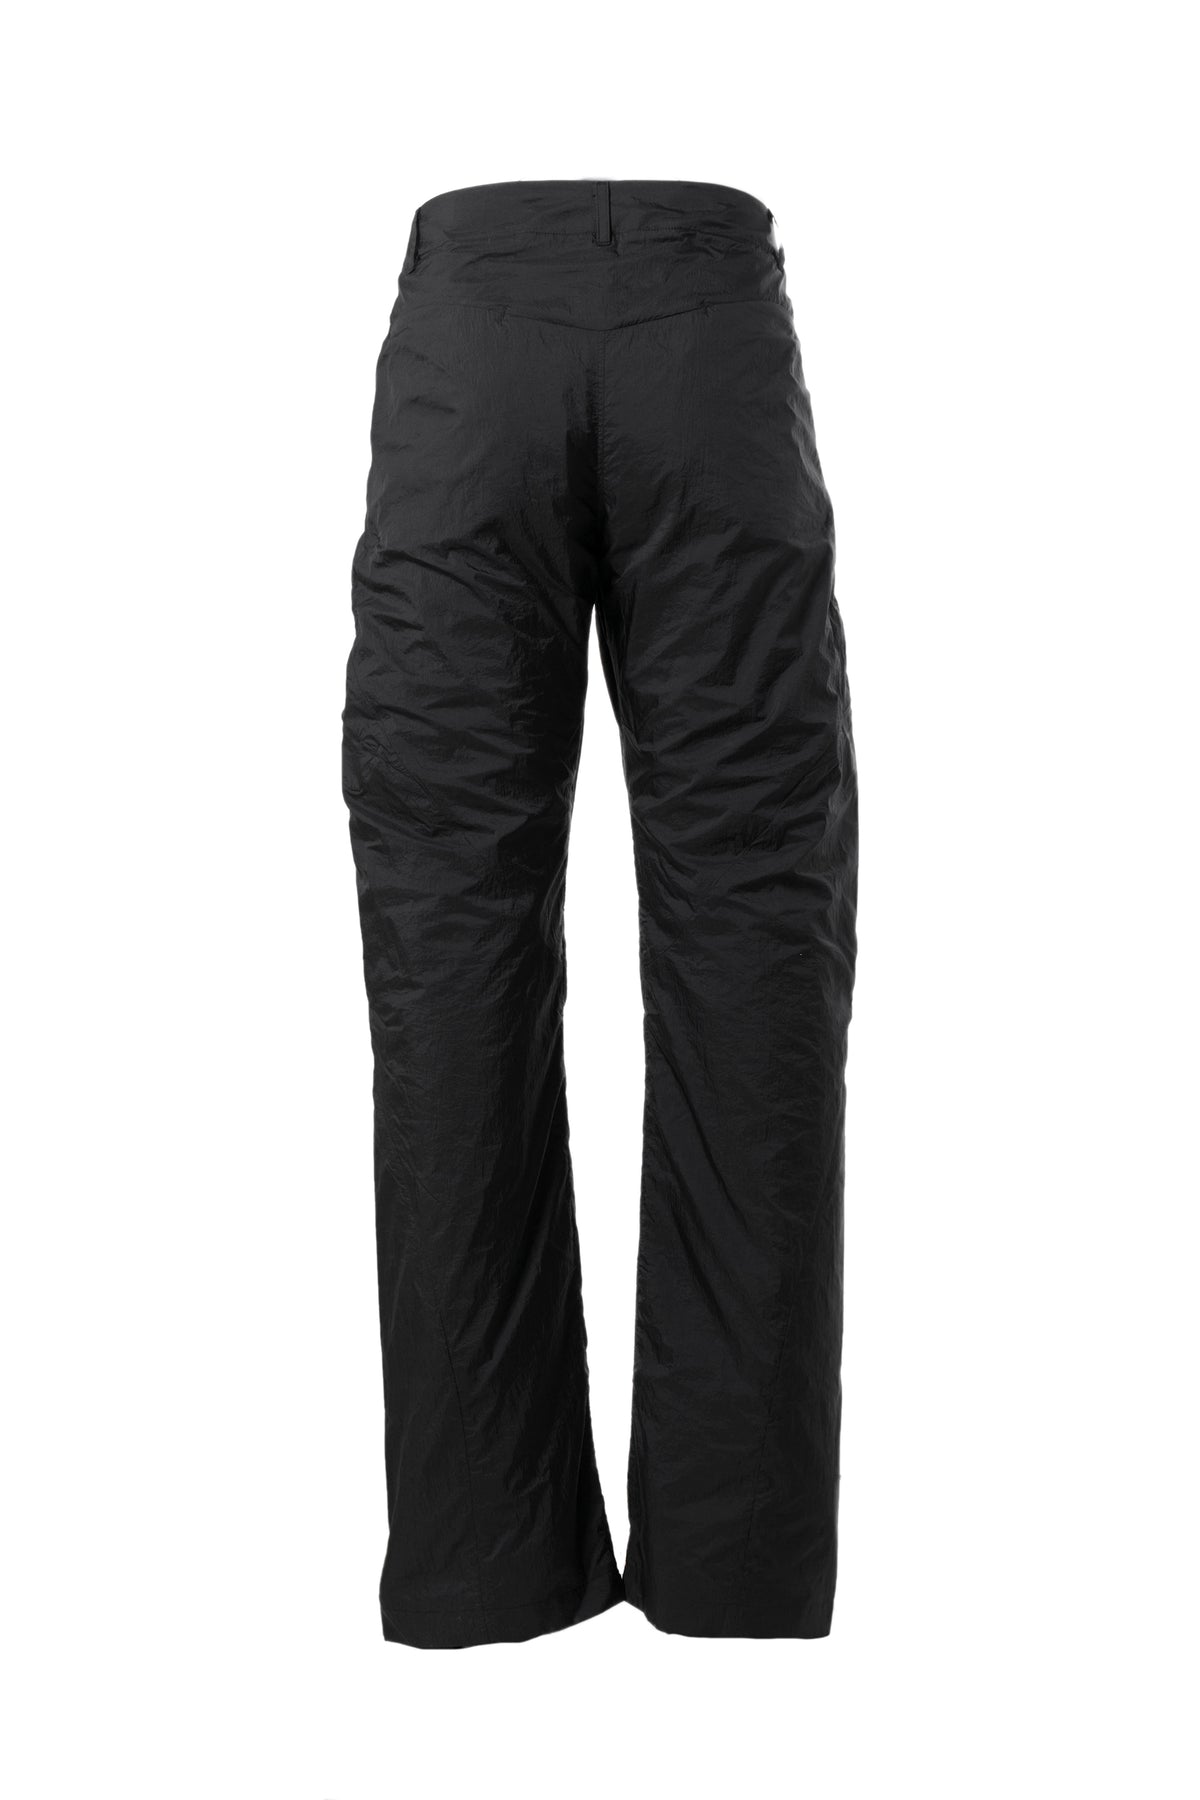 POST ARCHIVE FACTION 5.0+ TROUSERS CENTER / BLK/CHA